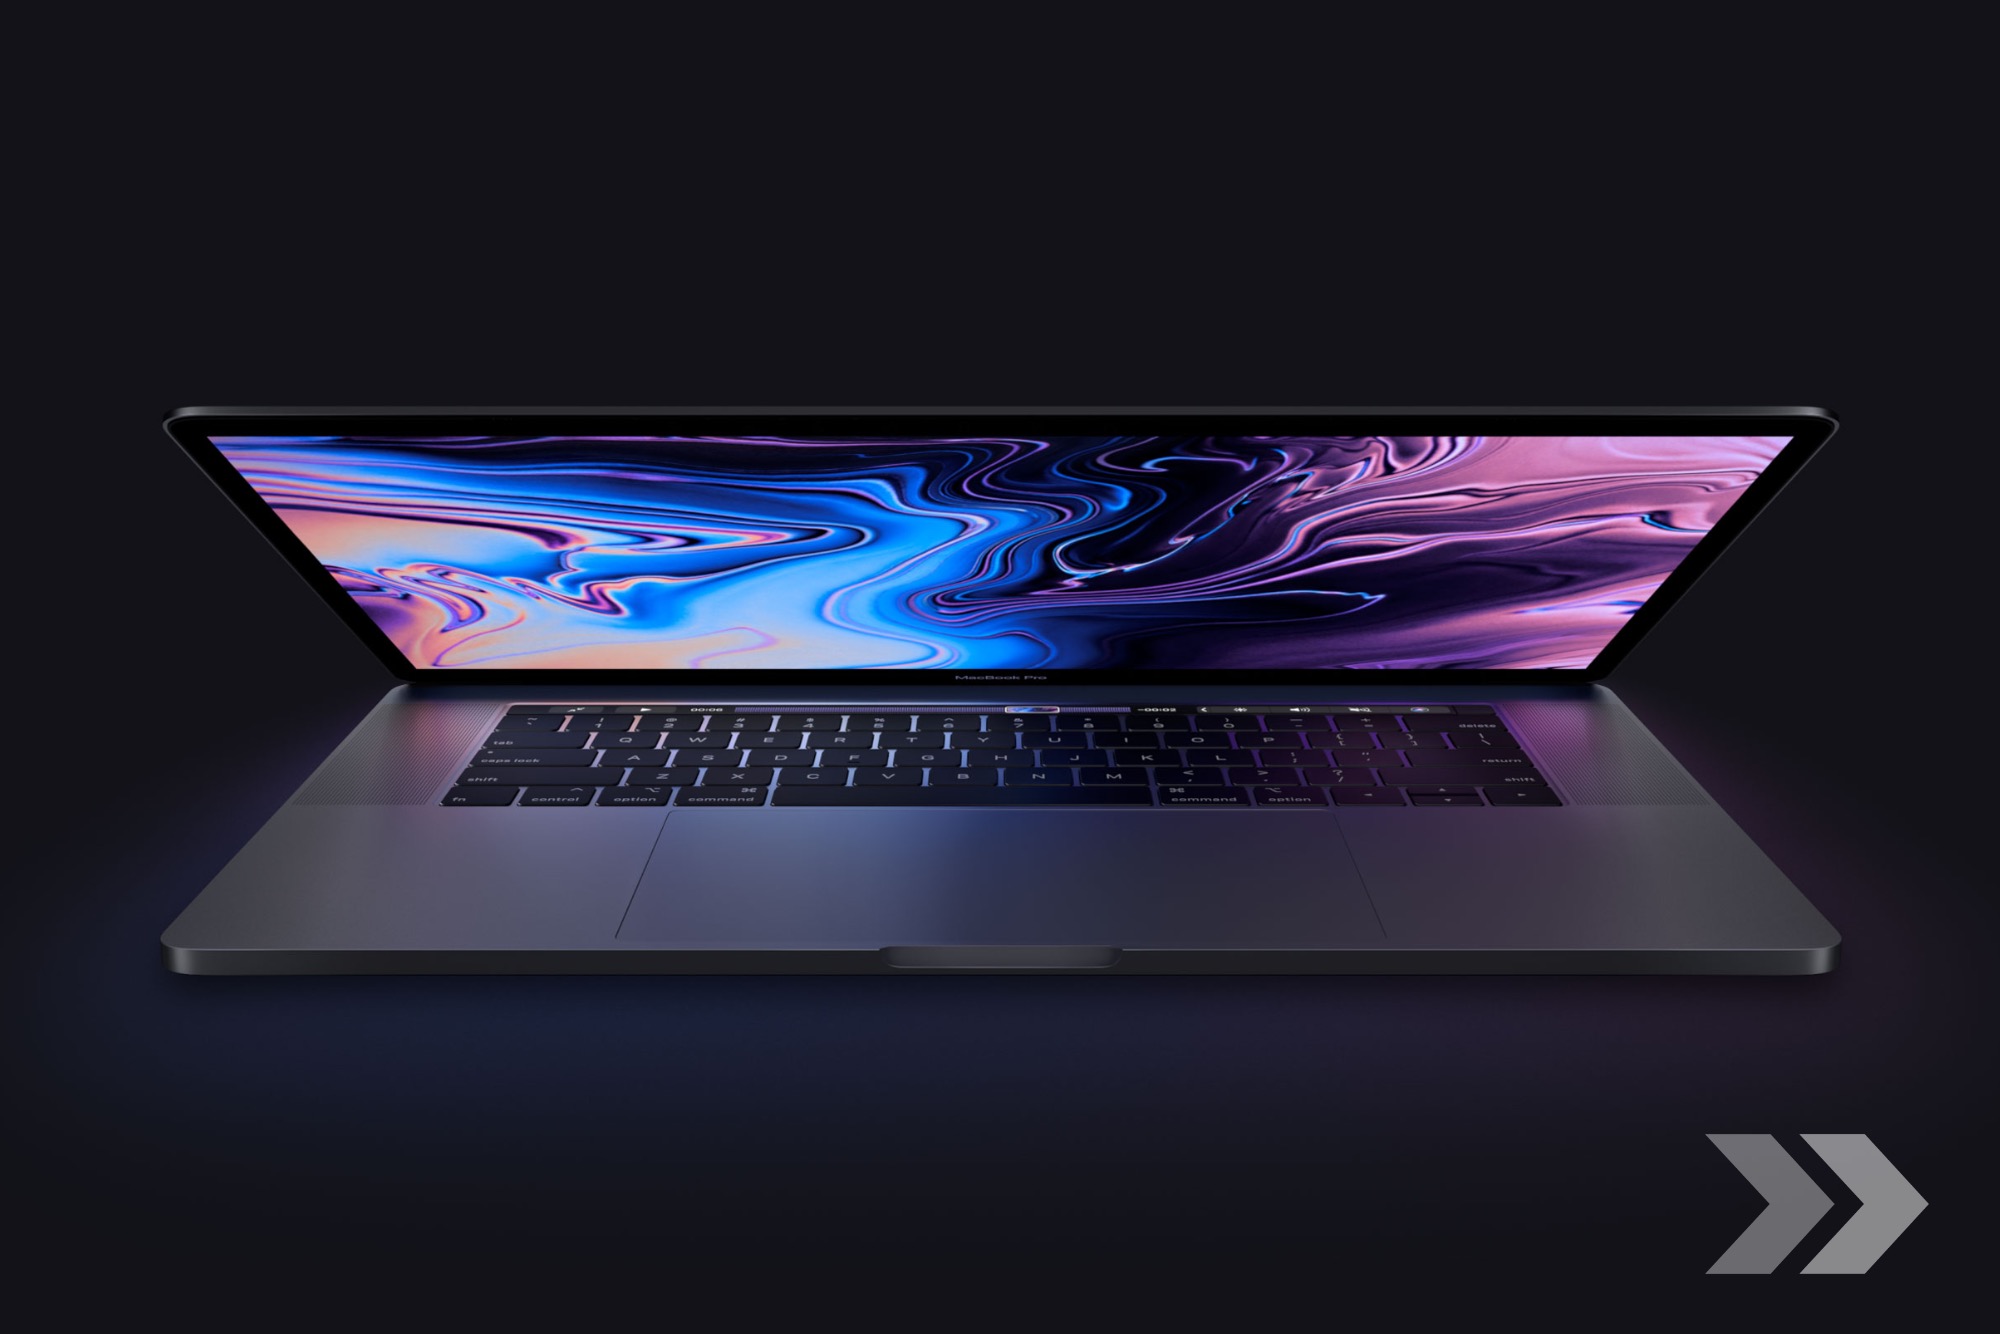 The Official Macbook Pro Wallpaper Here Iupdate